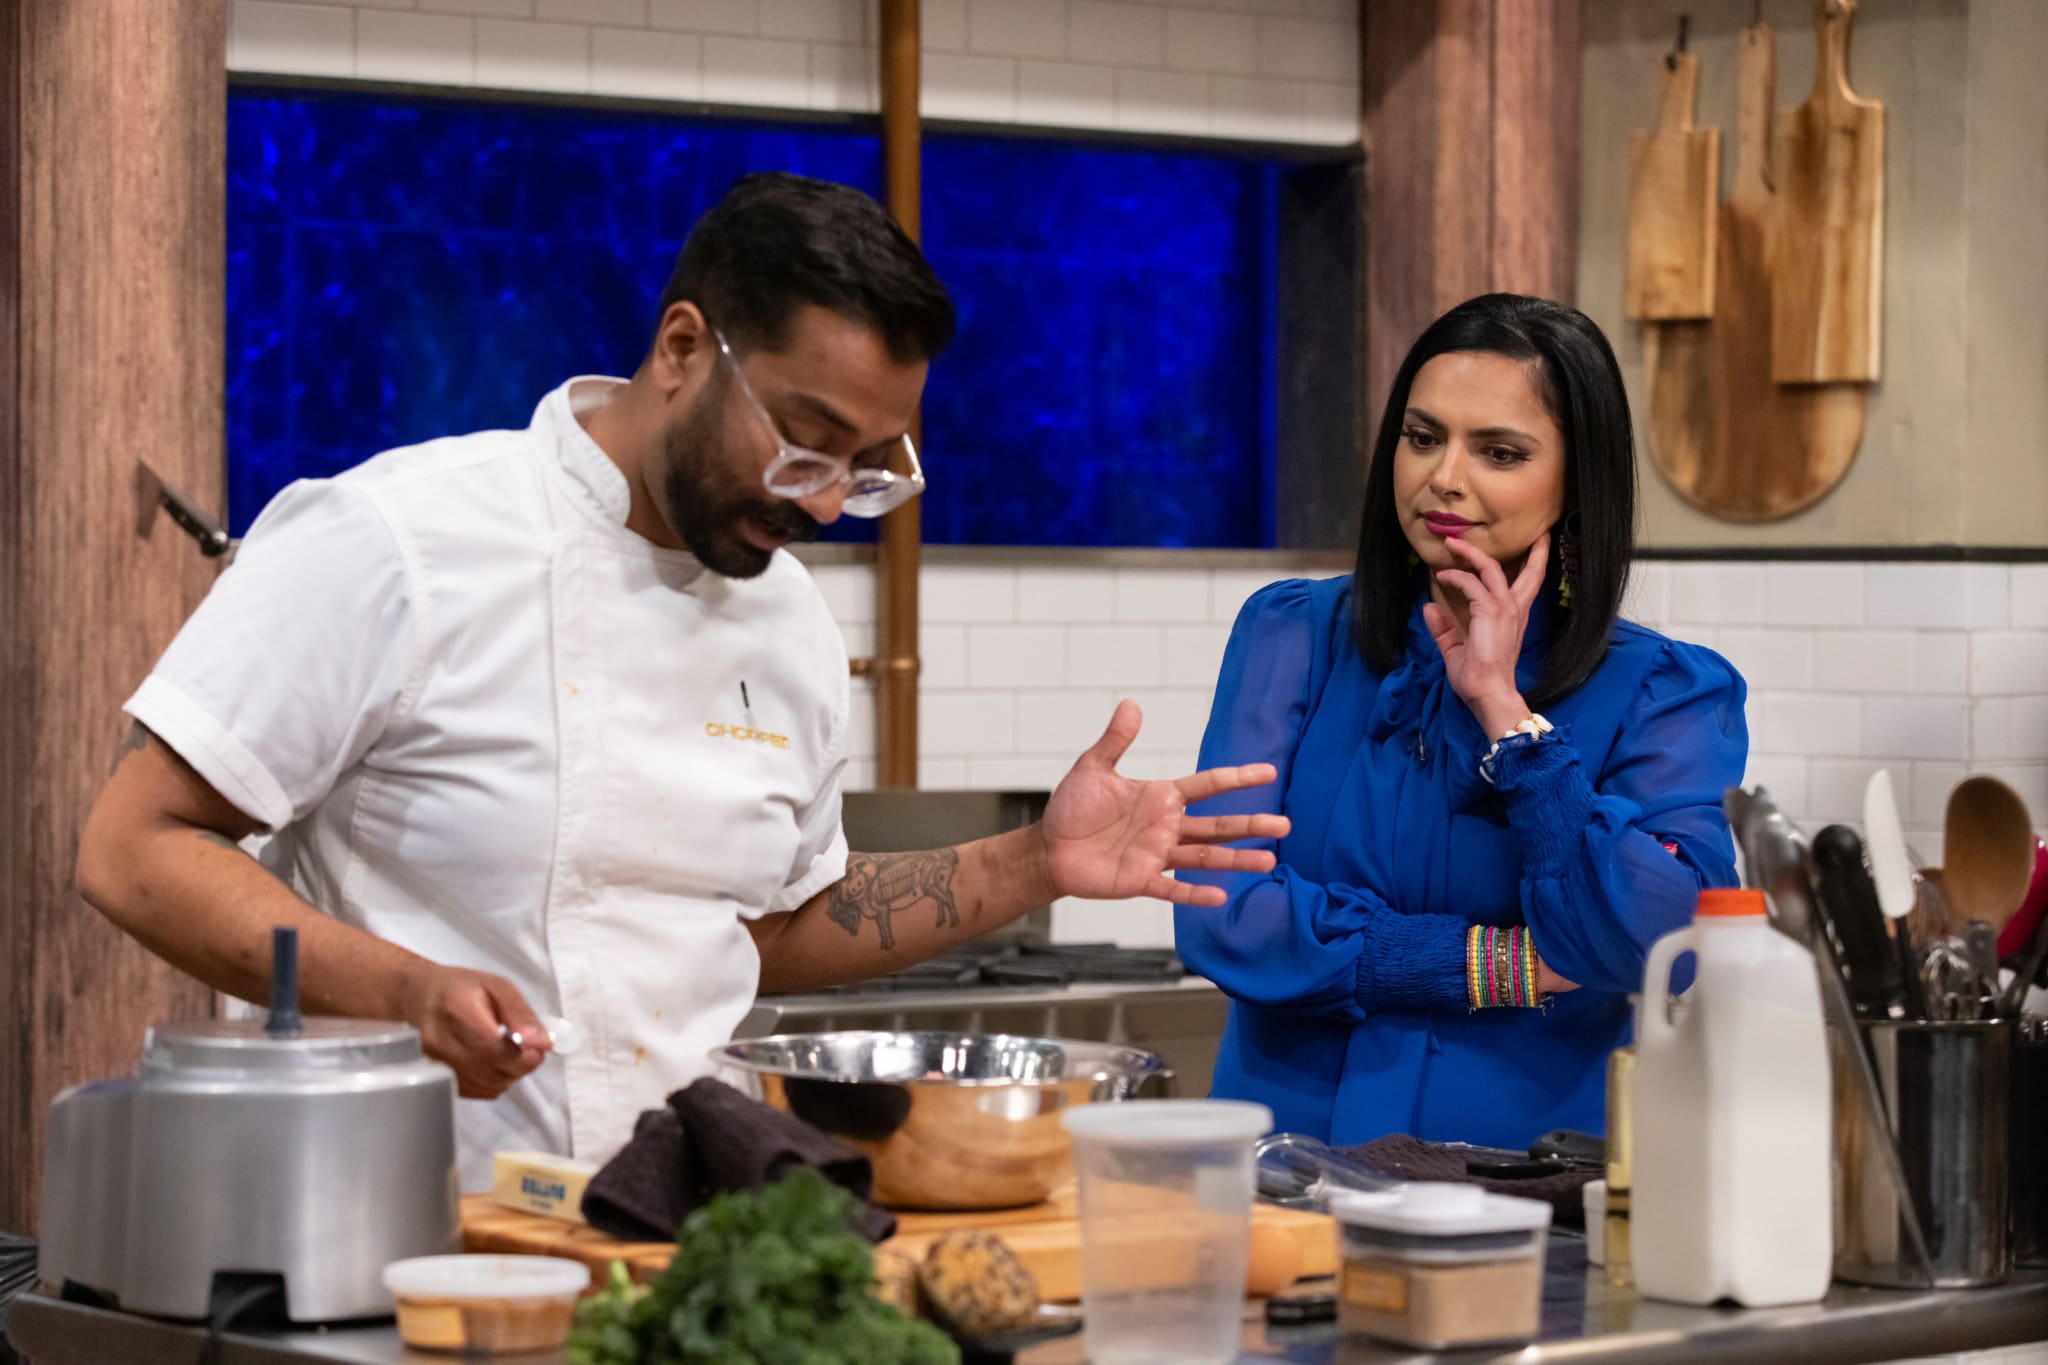 Featured image for “Delaware chef Reuben Dhanawade wows on Food Network”